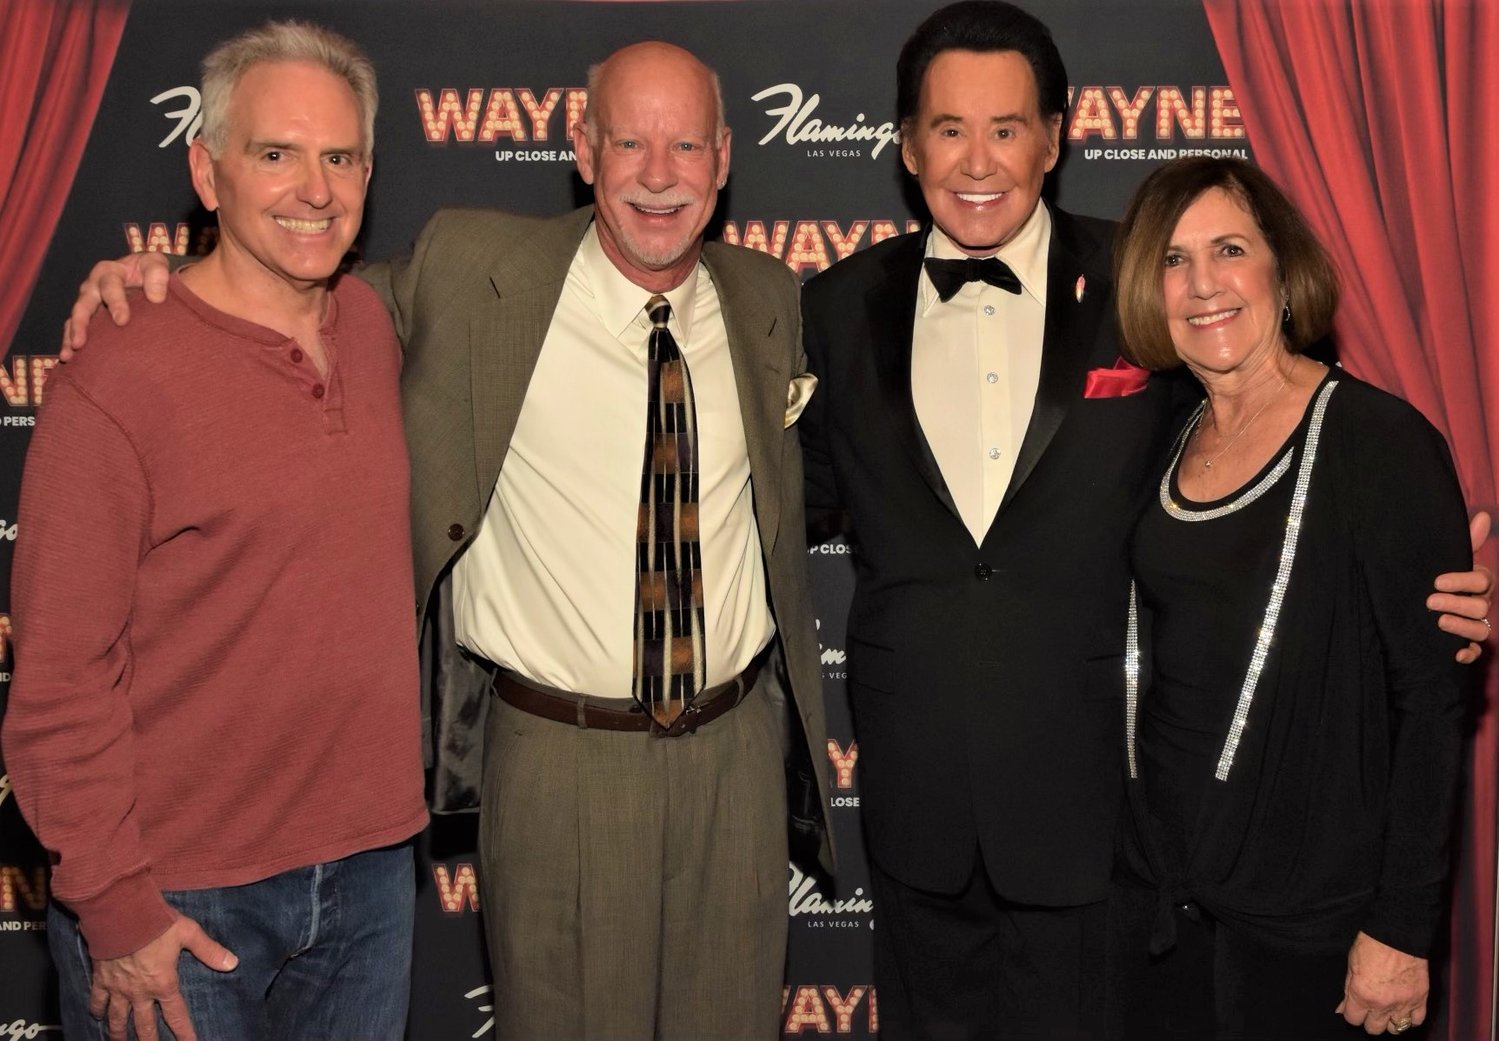 Lonnie Klein, second from left, with Wayne Newton, Christina Salazar and Mariano Longo